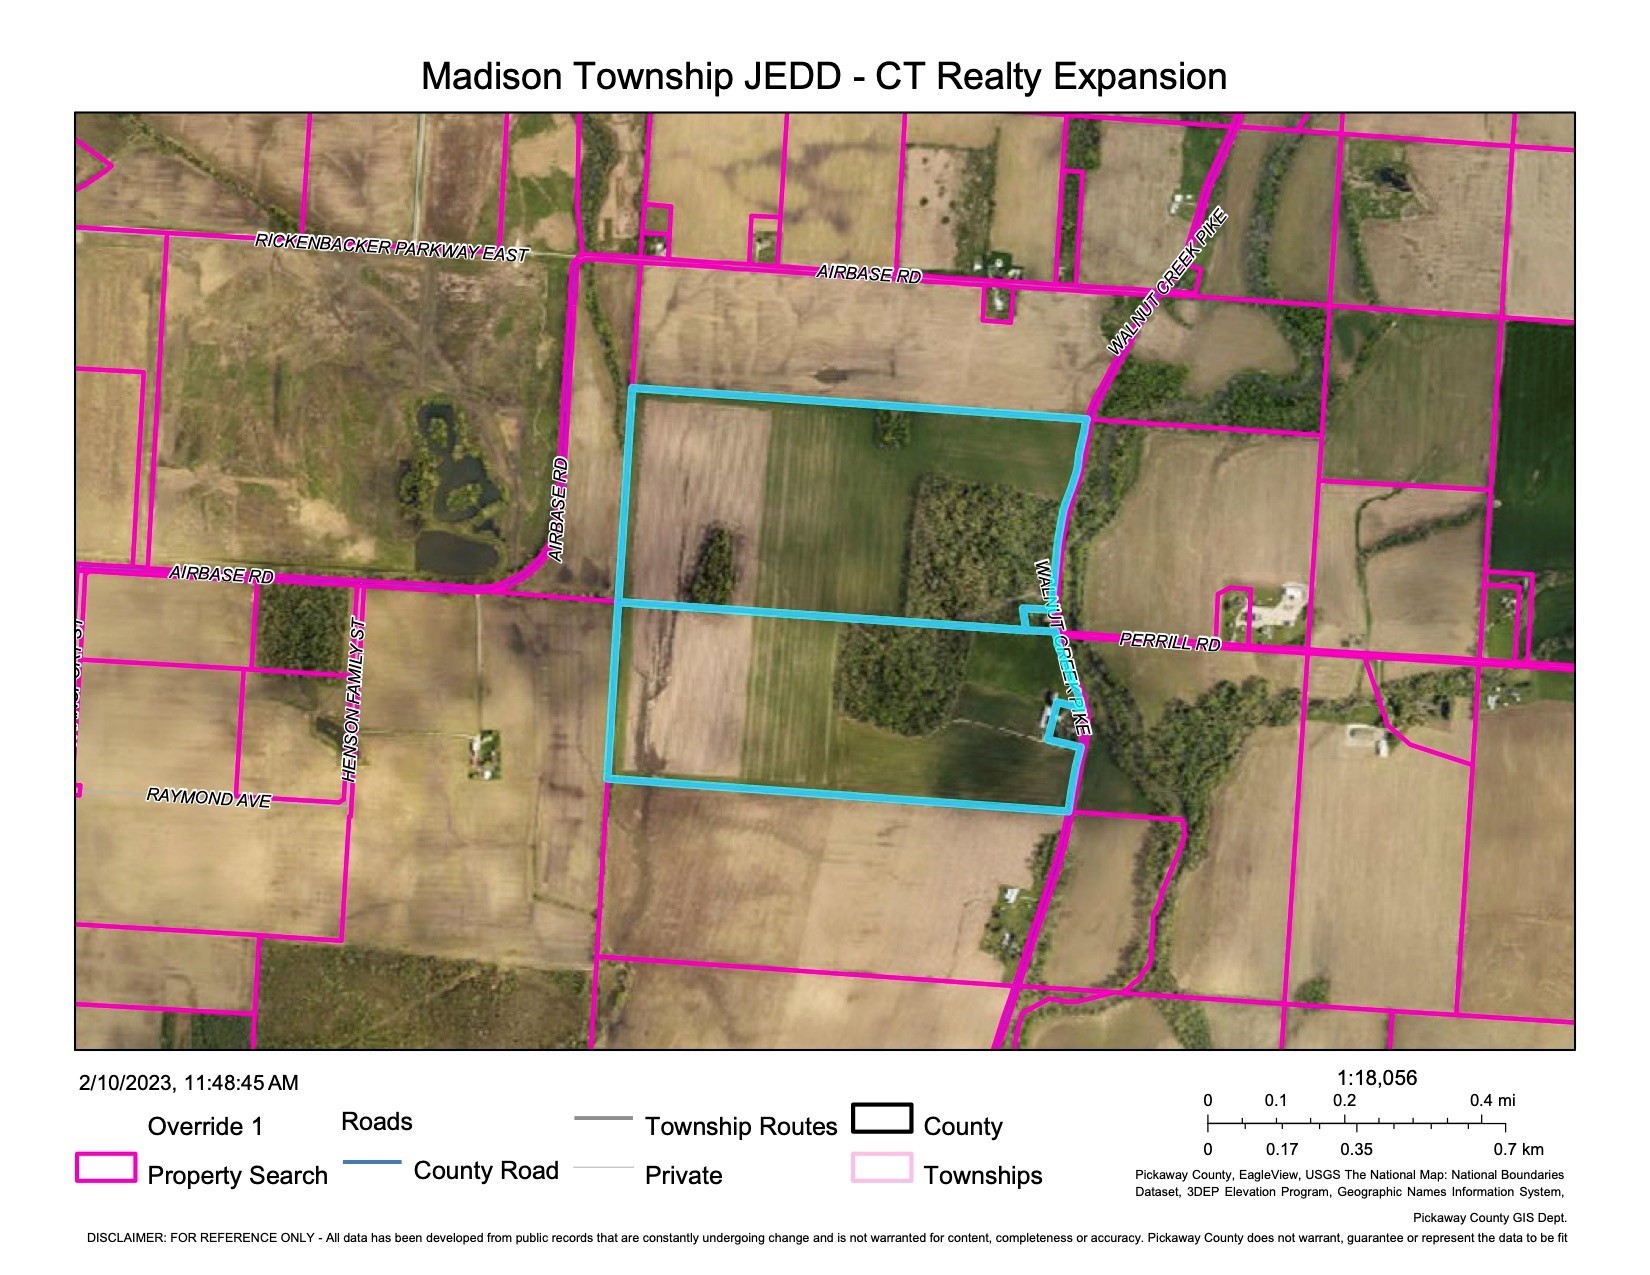 Madison Township JEDD Expansion CT Realty Version 2